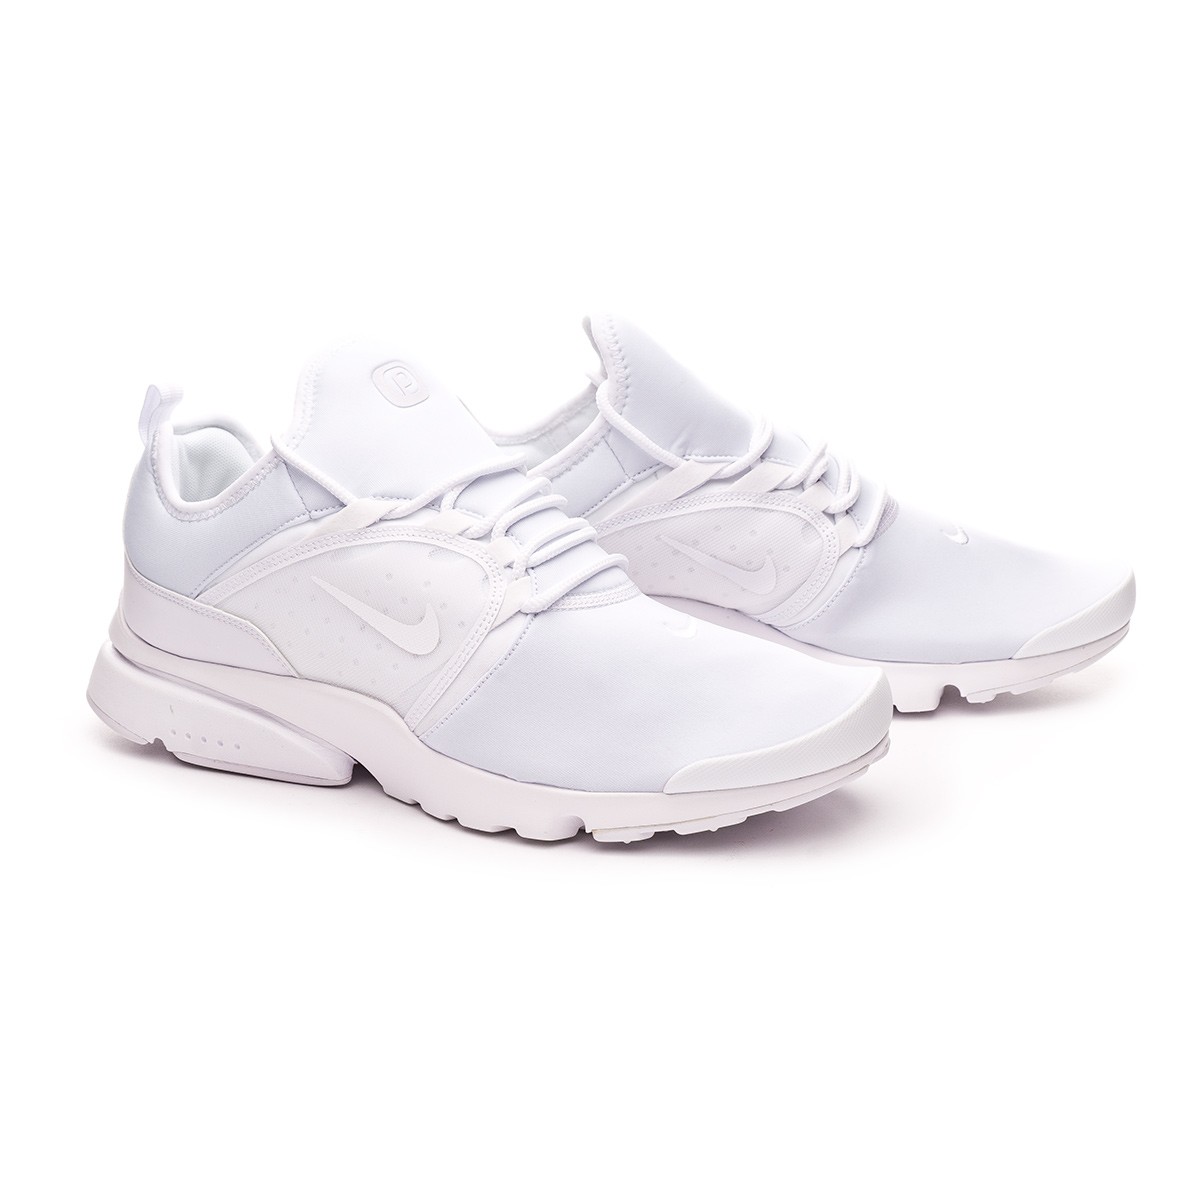 nike presto fly world mujer coupon for 824d8 a6f3e